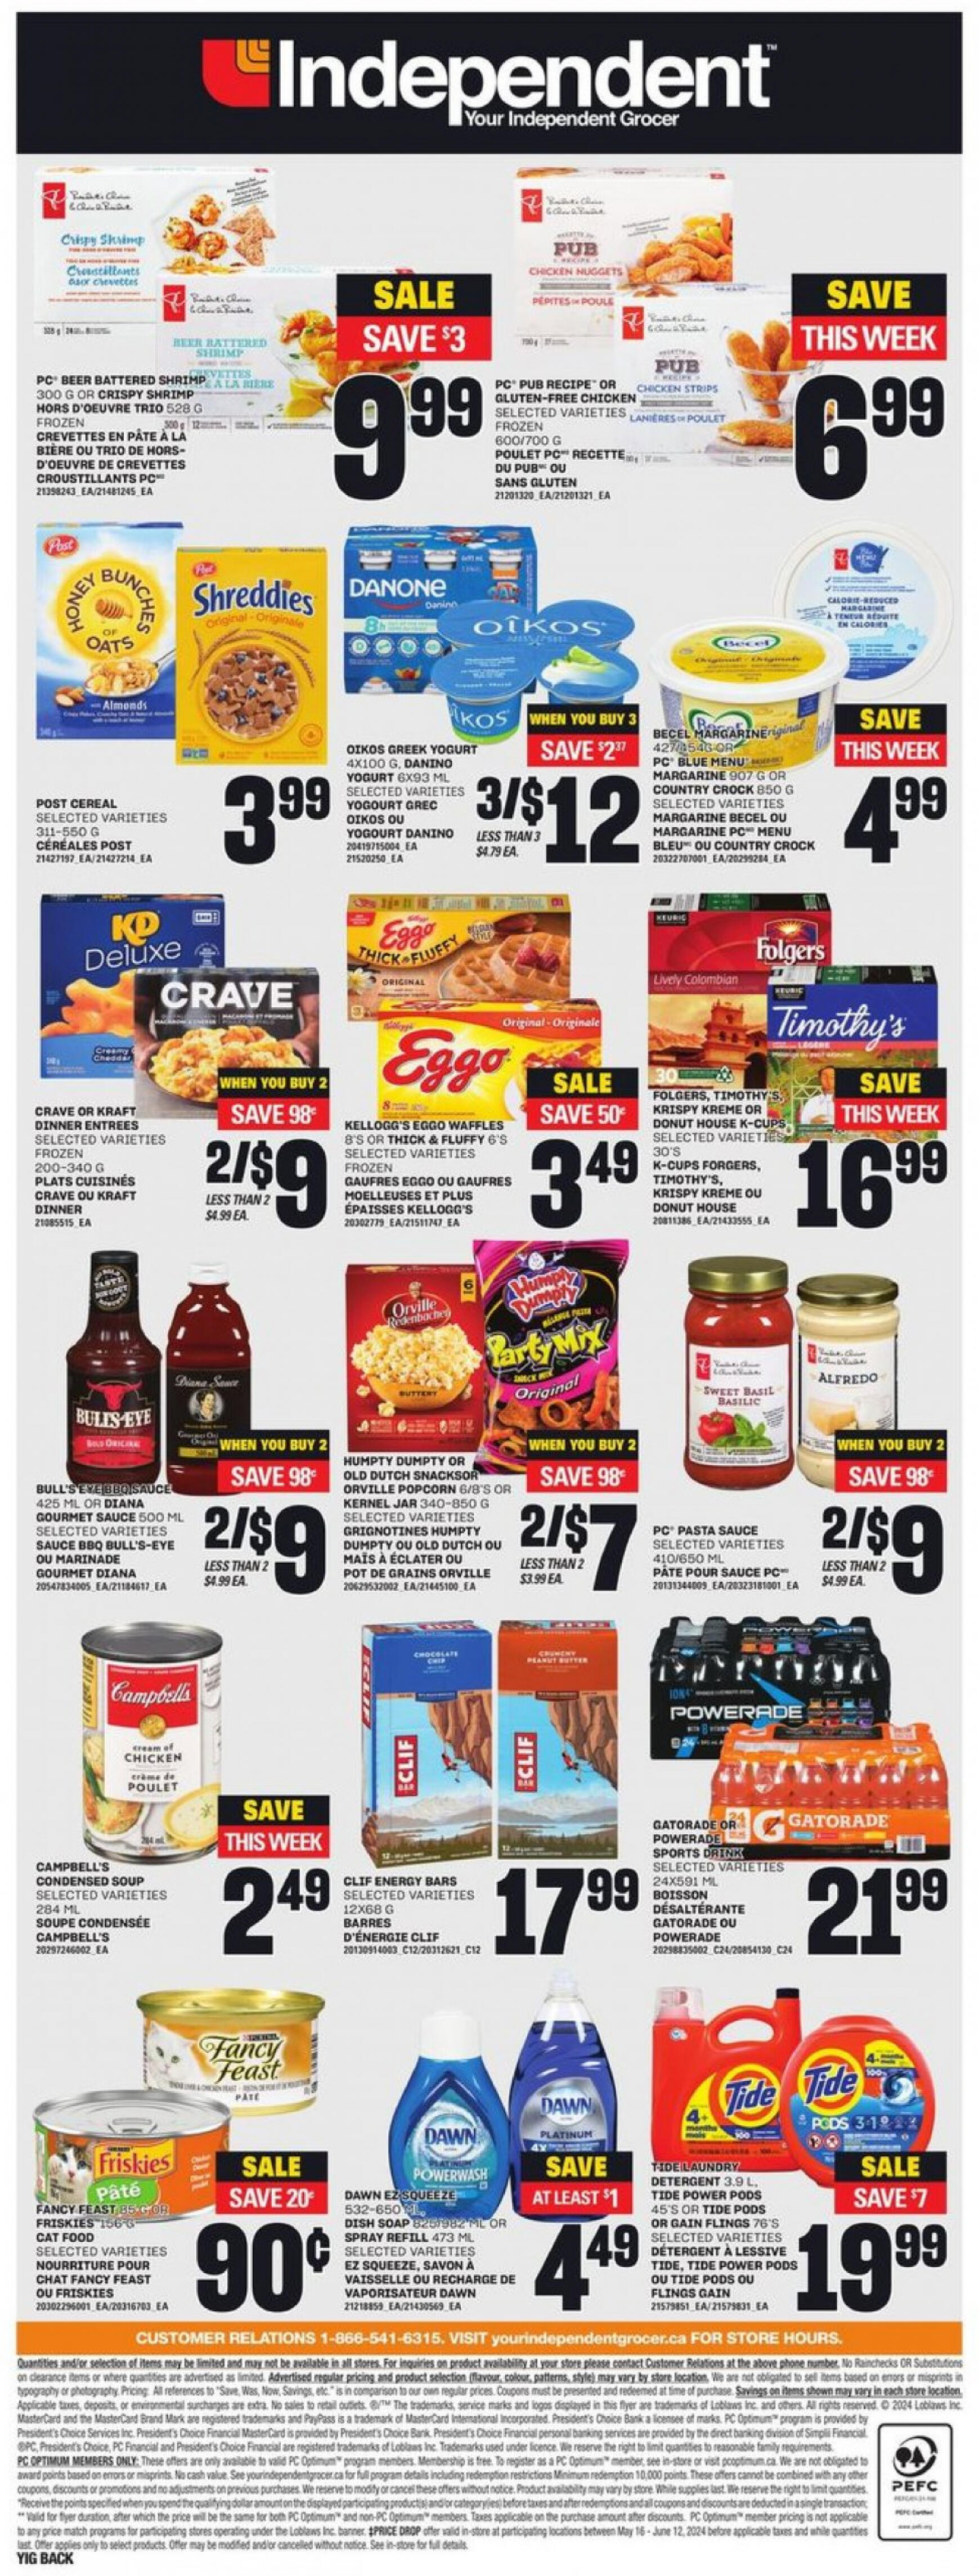 independent-grocery - Independent Grocery flyer current 23.05. - 29.05. - page: 6